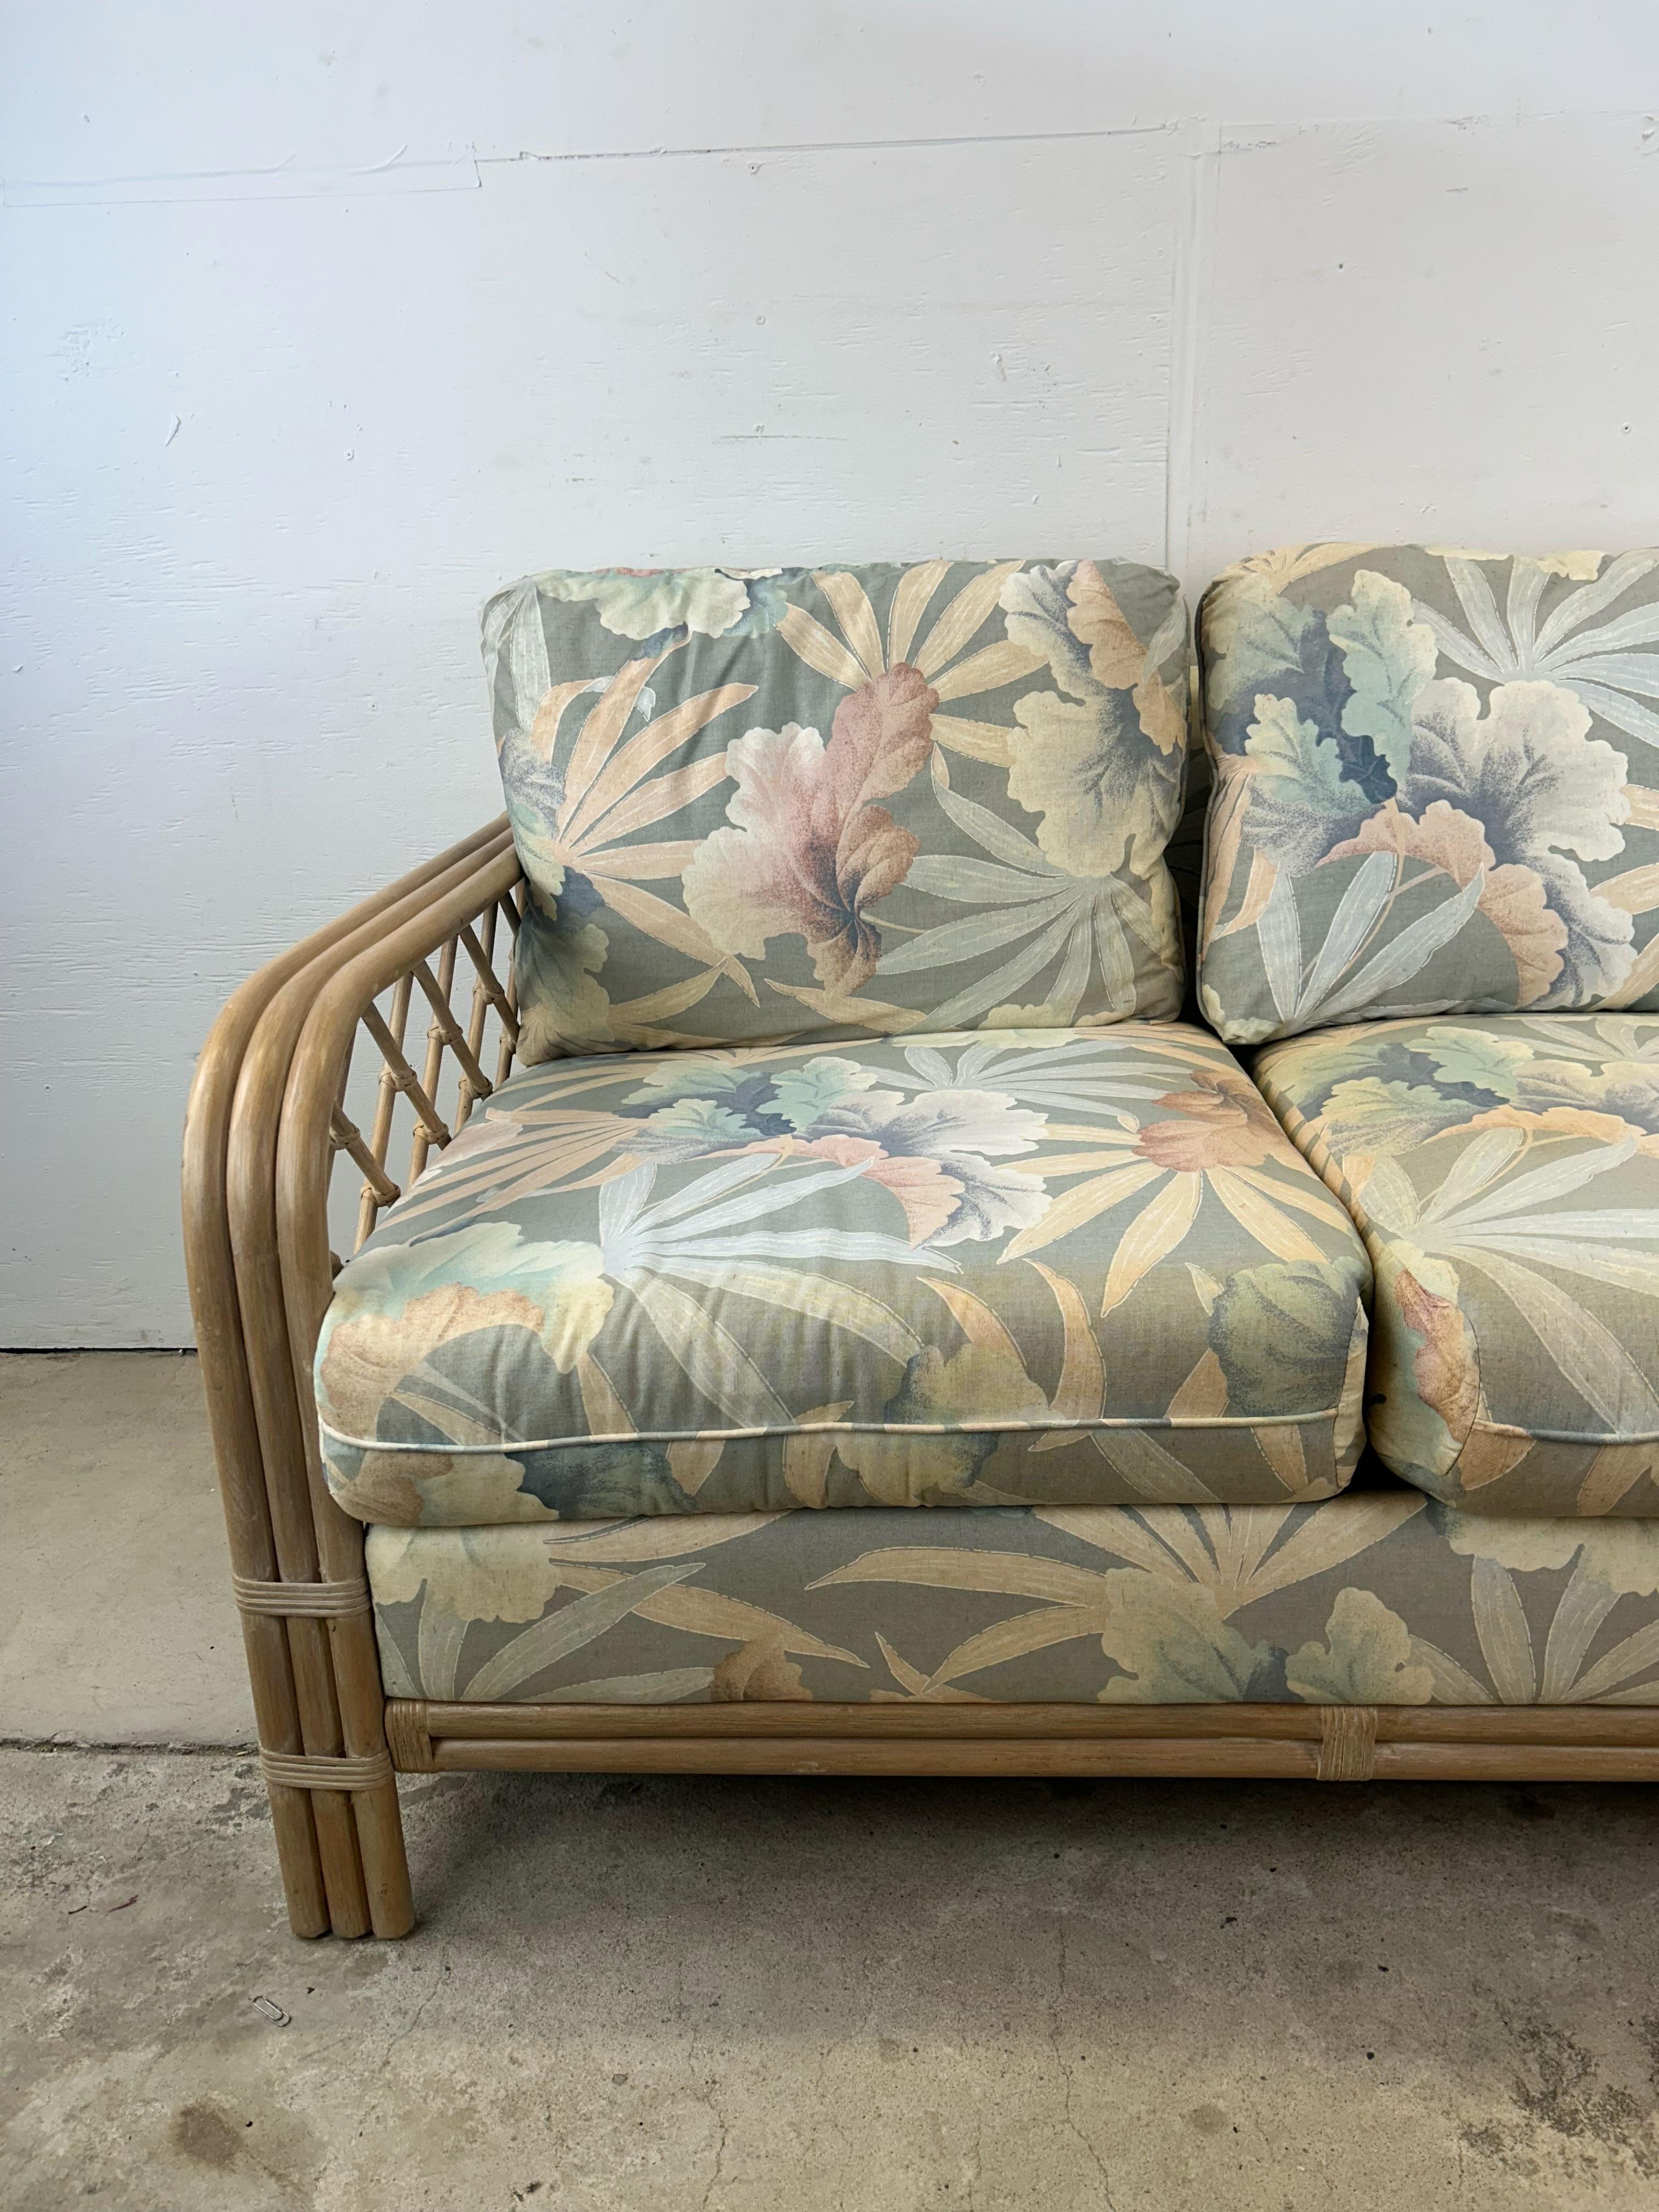 Vintage Boho Chic Rattan Loveseat with Floral Upholstery In Good Condition For Sale In Freehold, NJ